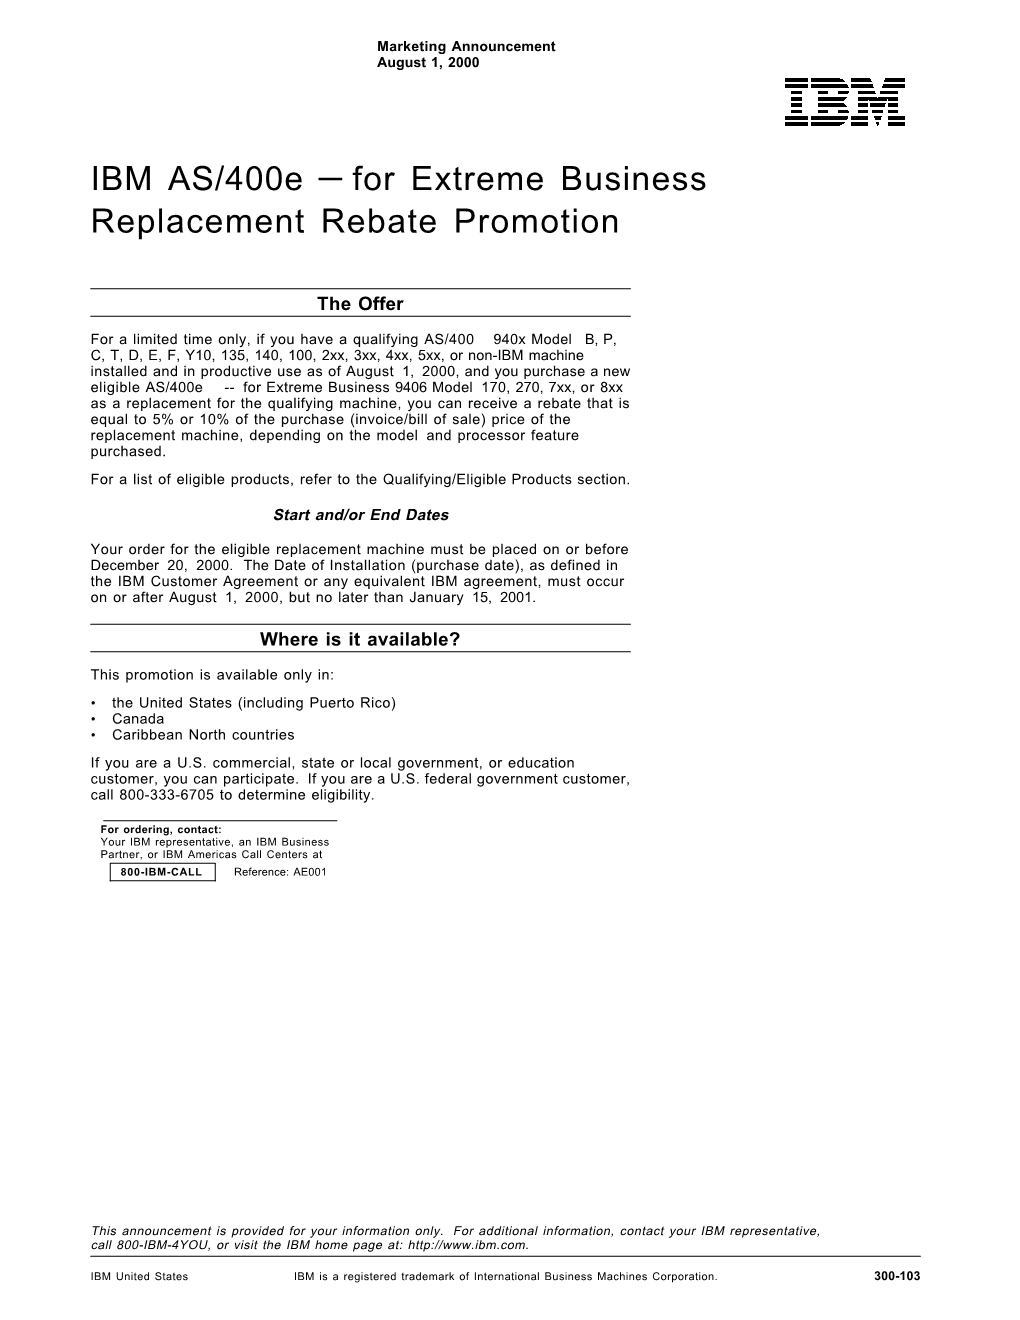 IBM AS/400E — for Extreme Business Replacement Rebate Promotion